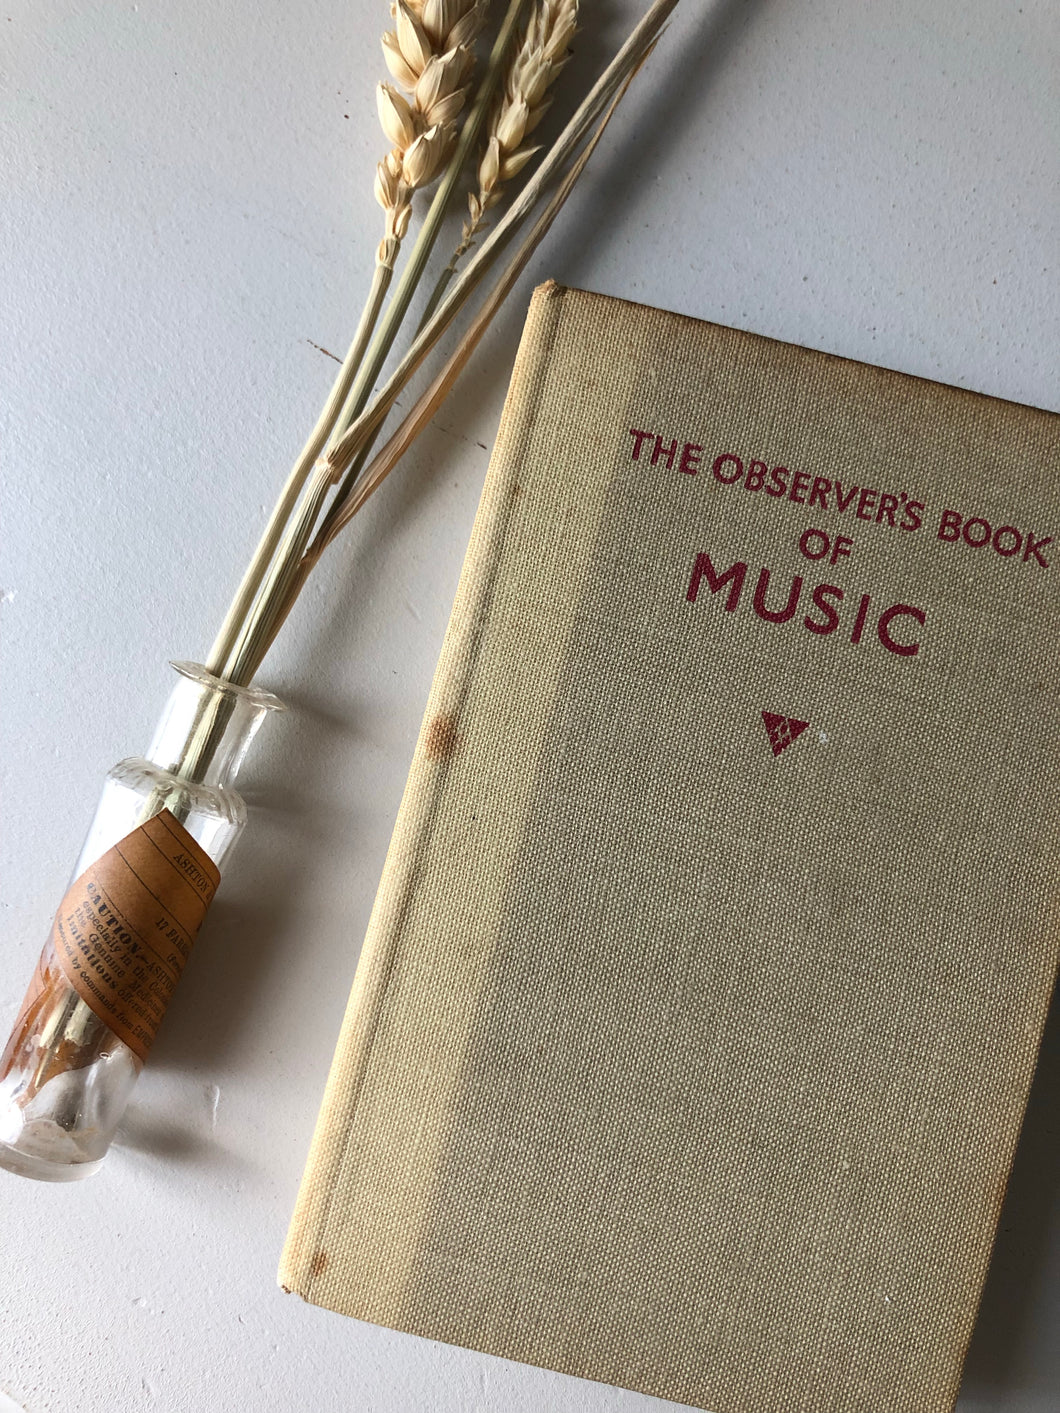 Observer Book of Music